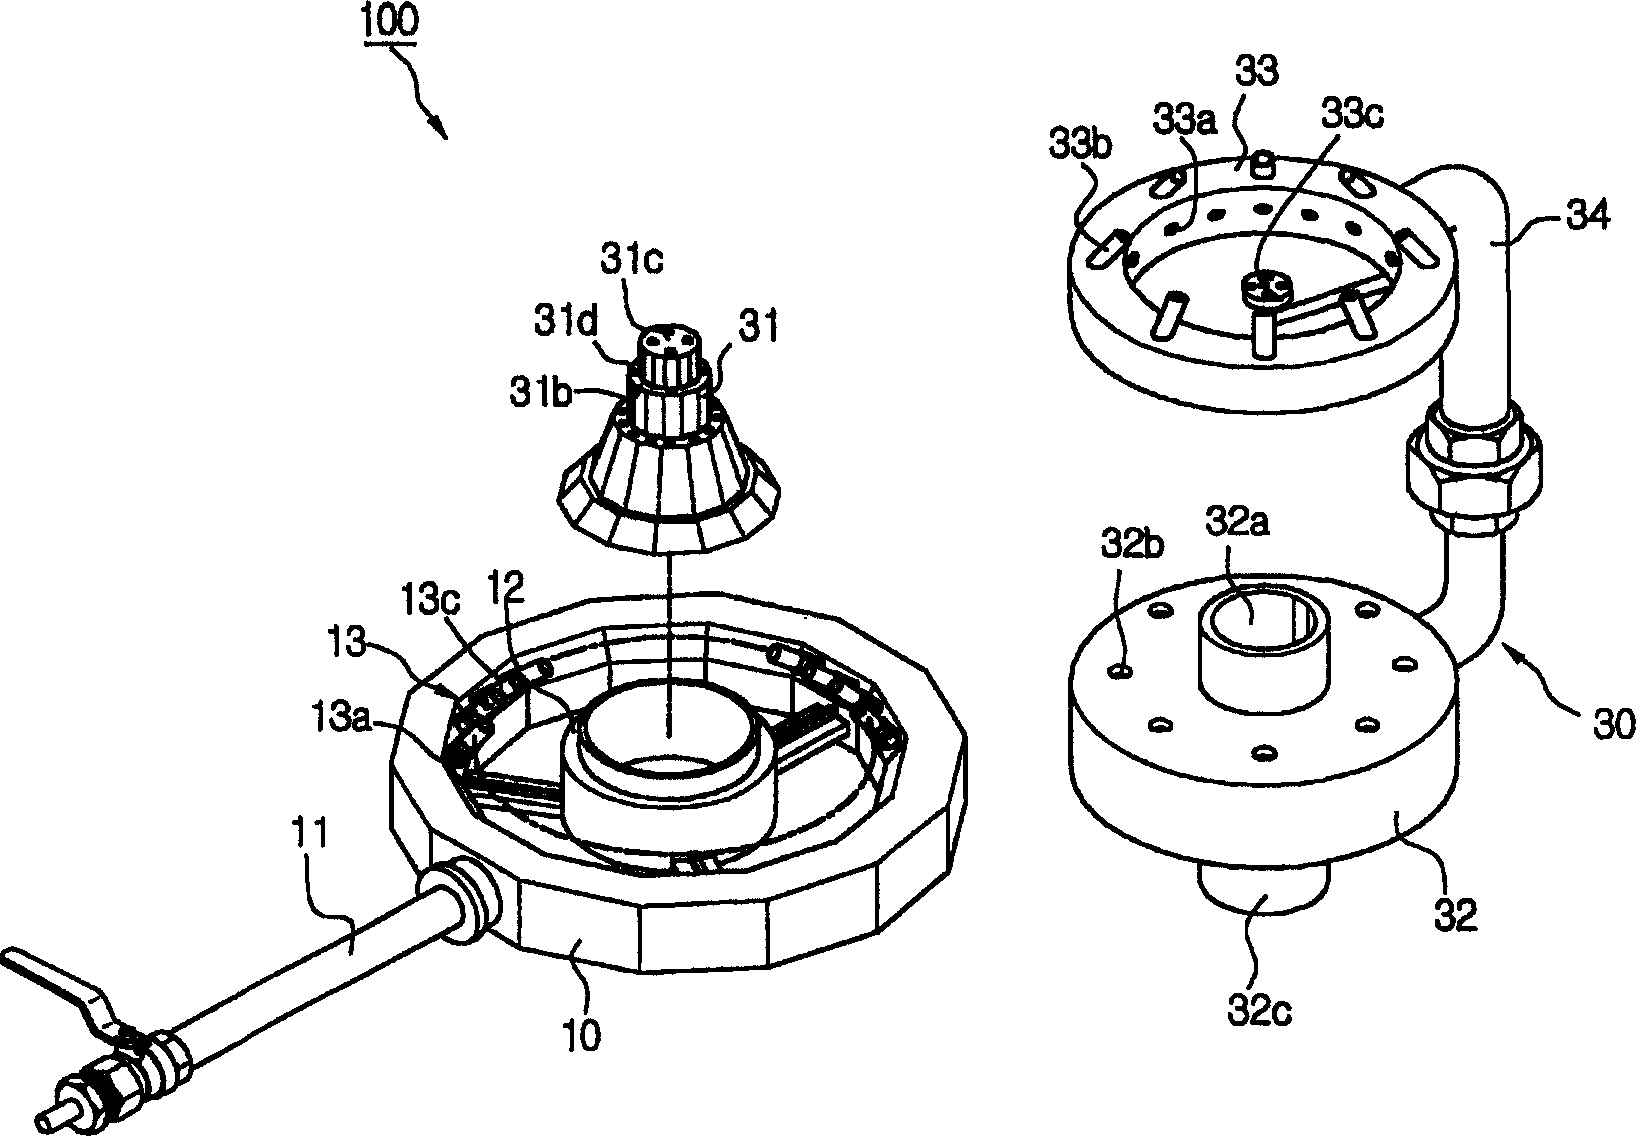 Device for increasing heat power of gas burner